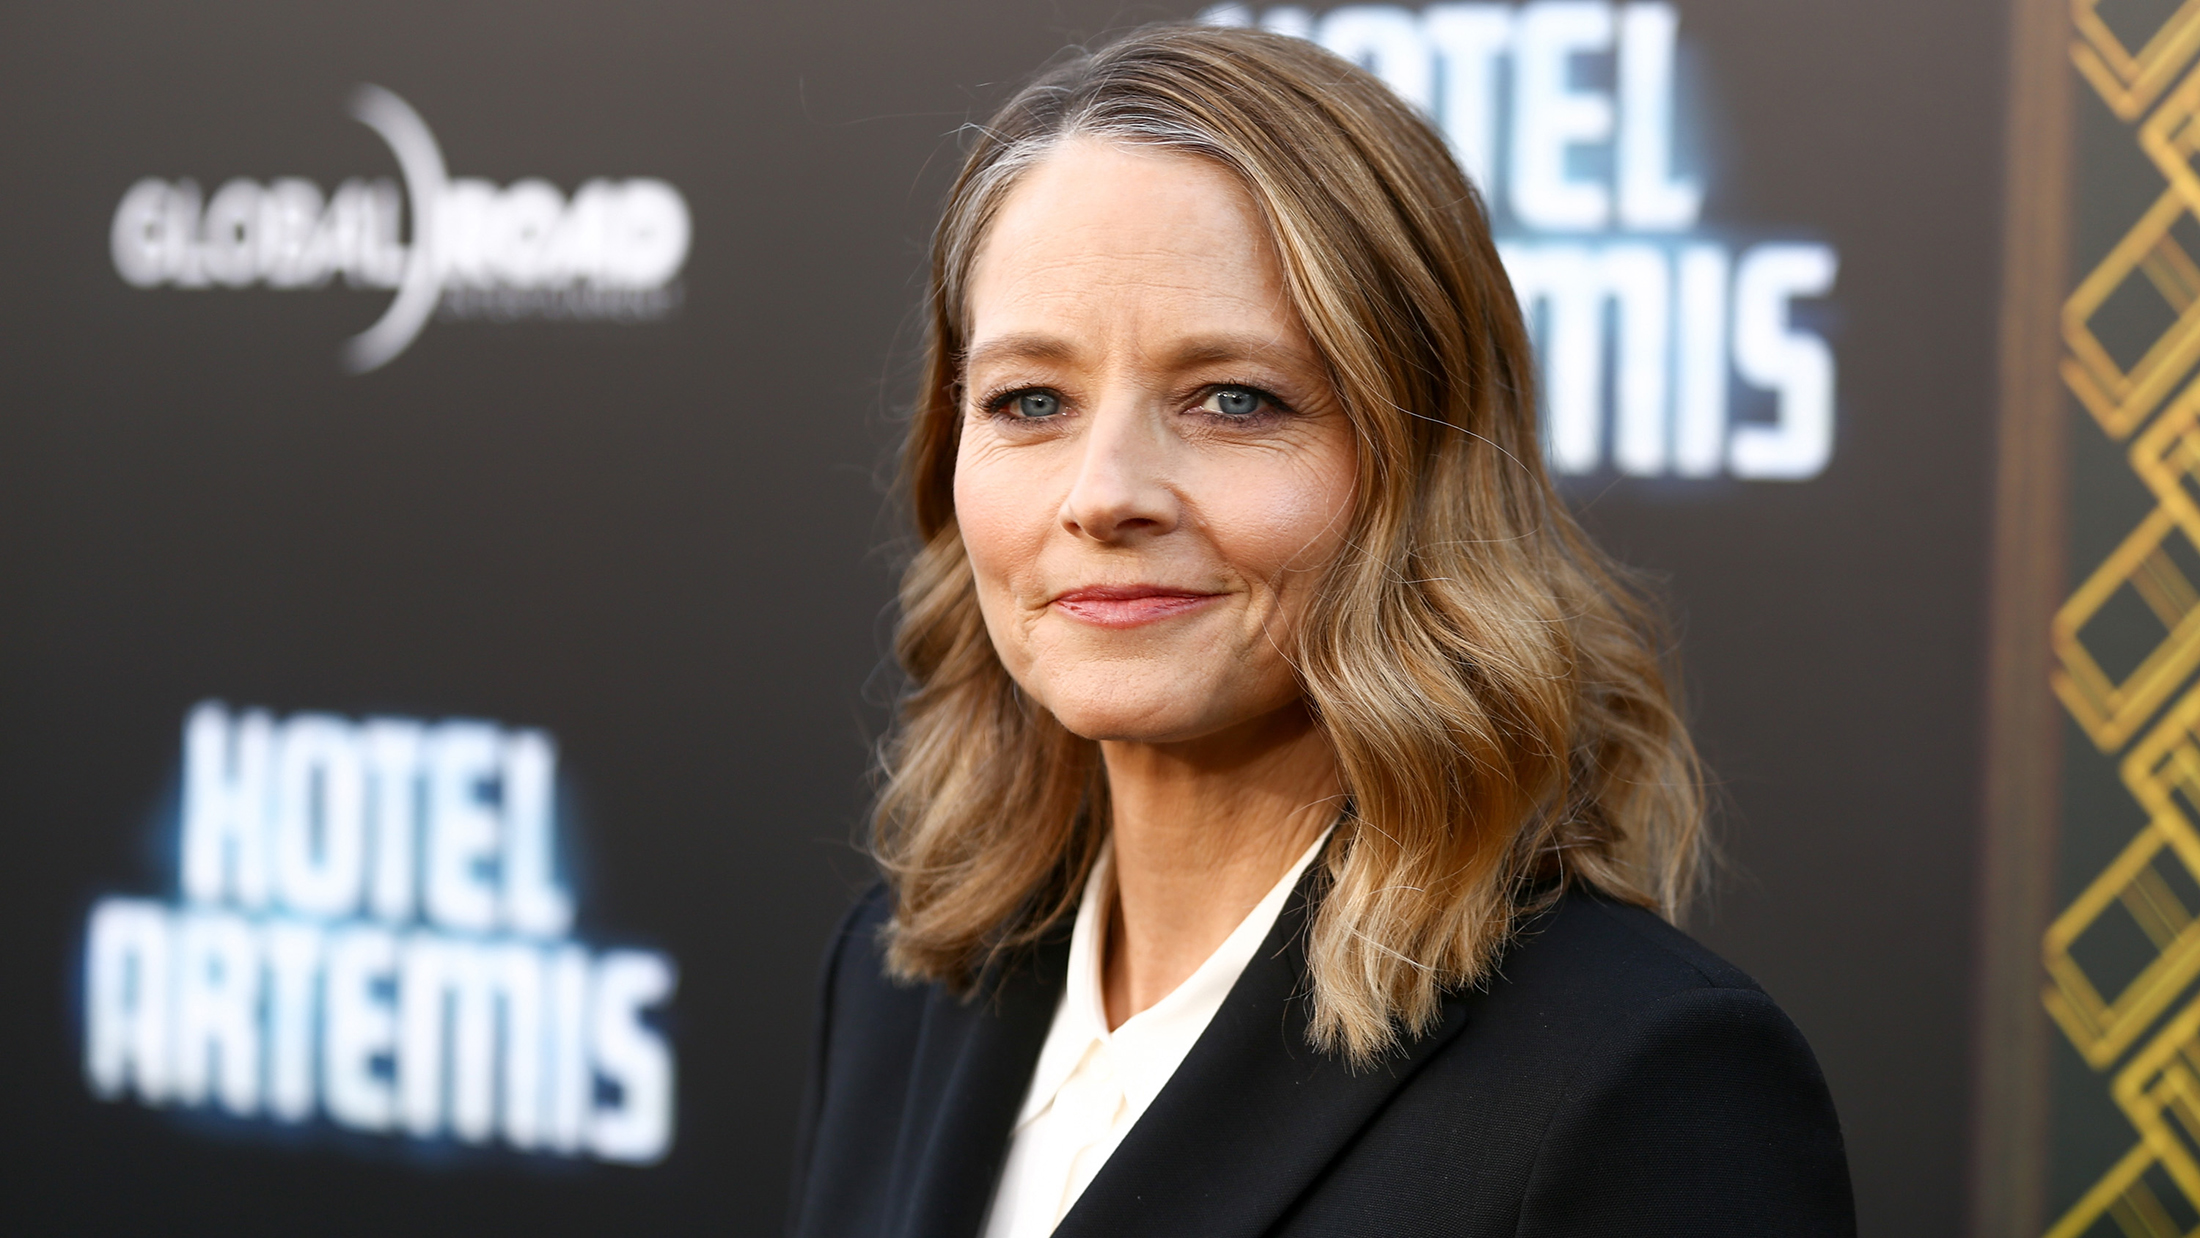 Julie Snyder speaks with US actress Jodie Foster on Monday

